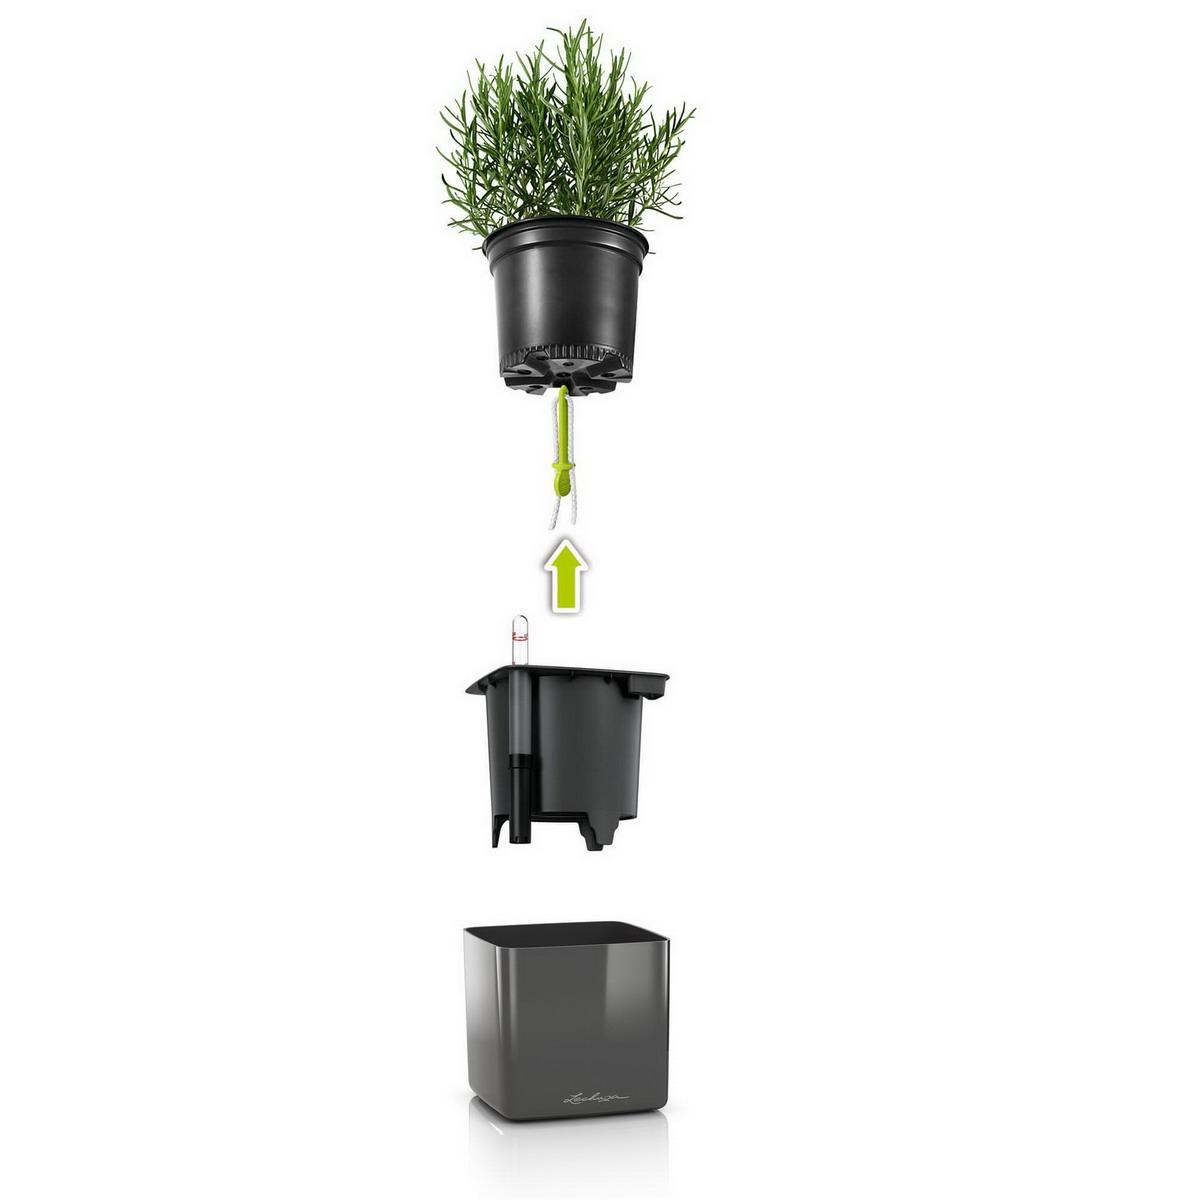 LECHUZA CUBE Glossy 16 Charcoal HighGloss Poly Resin Table Self-watering Planter with Water Level Indicator H16 L17 W17 cm, 1.4L - citiplants.com